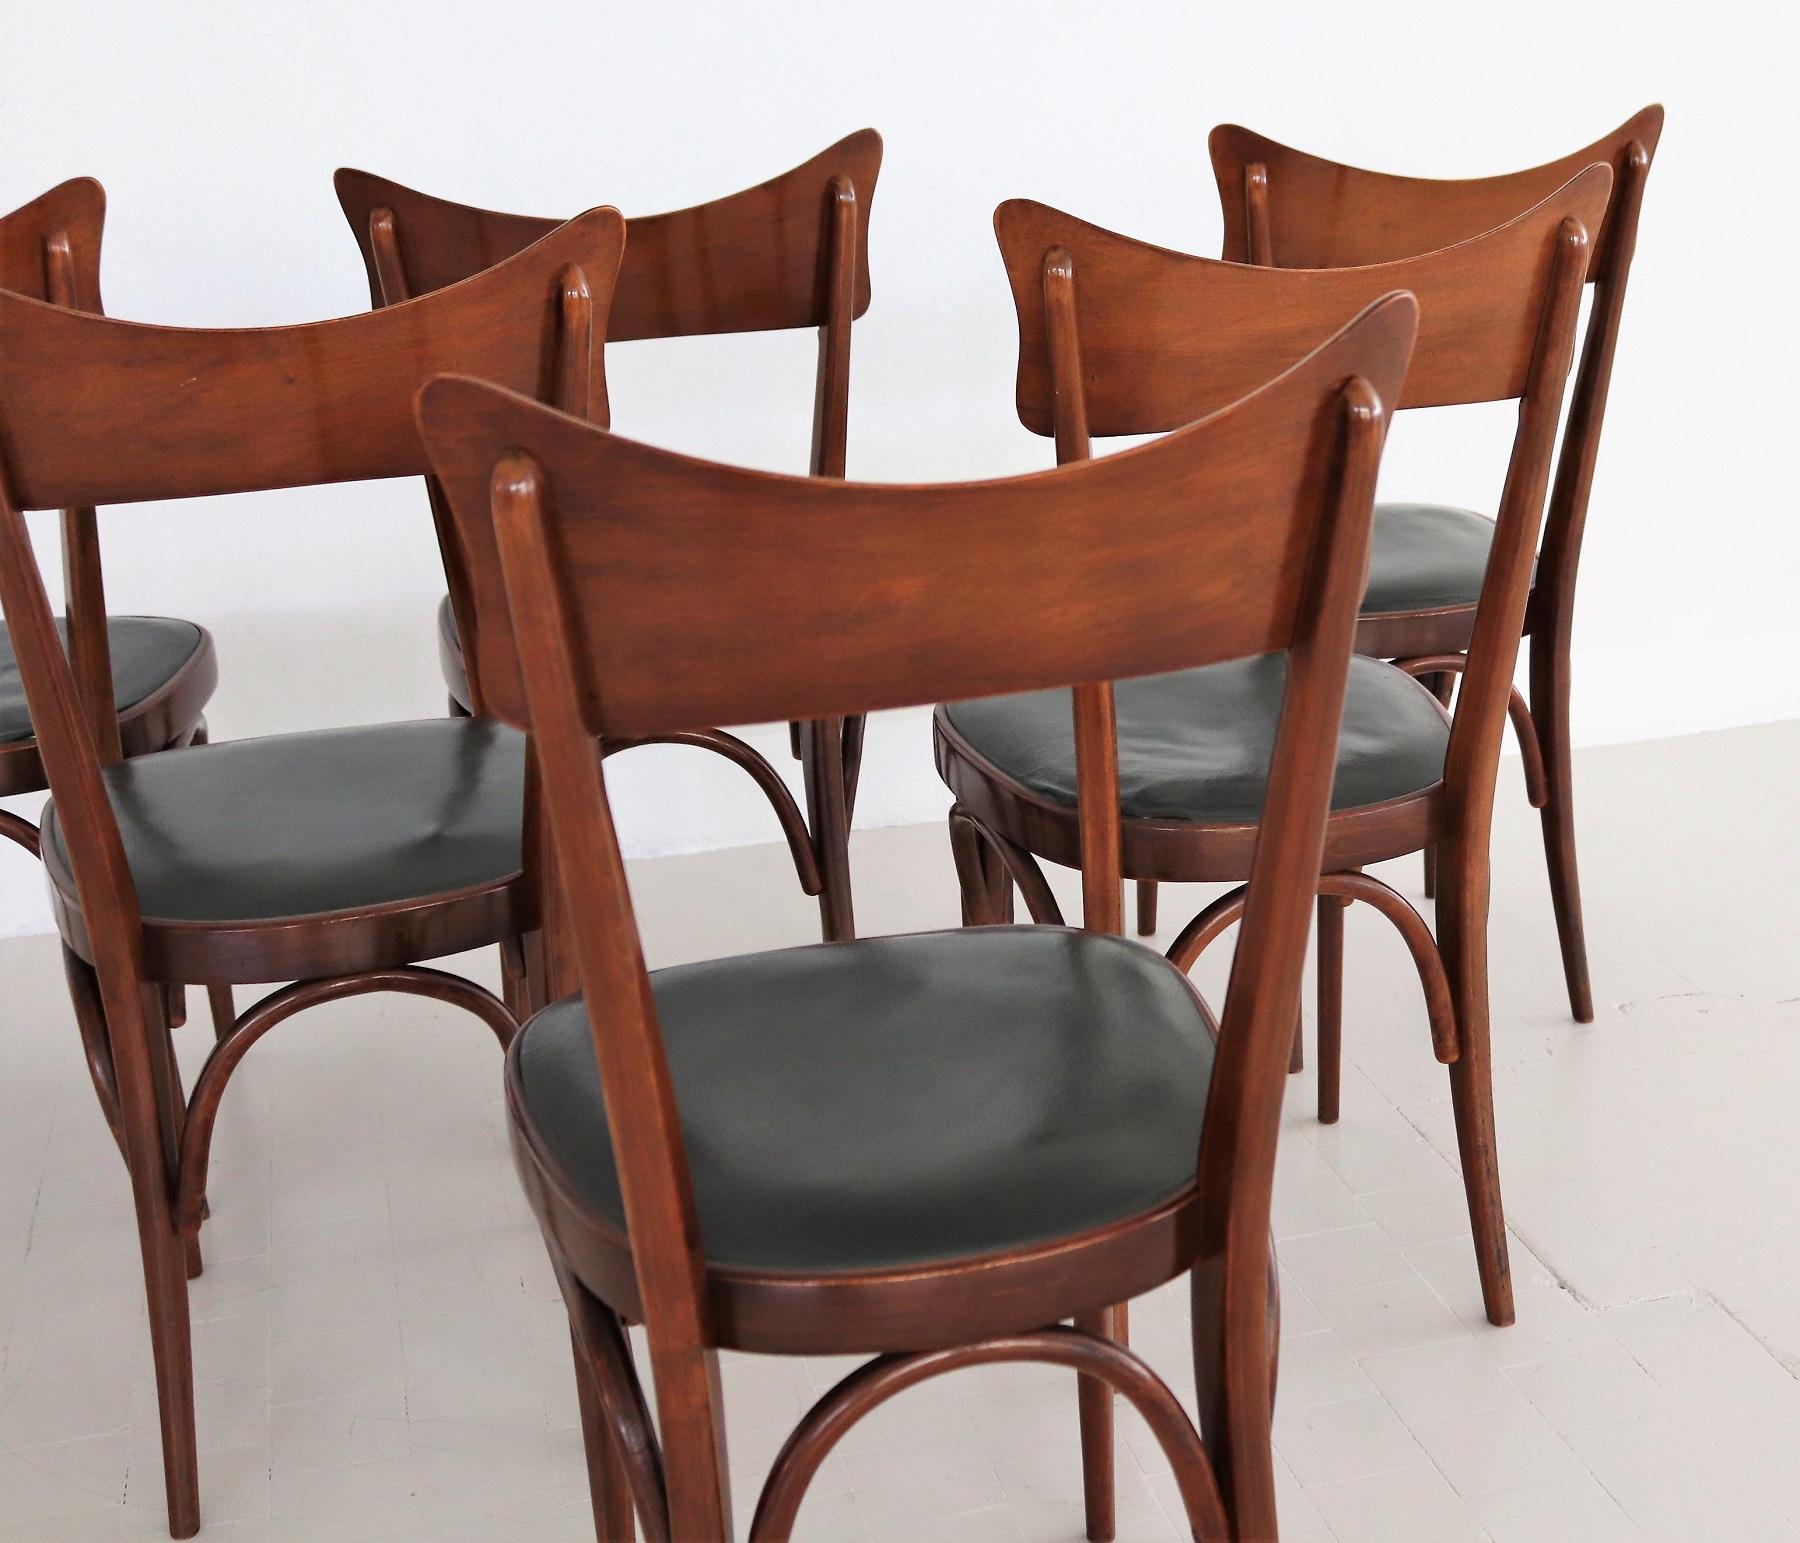 Stained Ico Parisi Style Italian Dining Room Chairs, Set of six For Sale